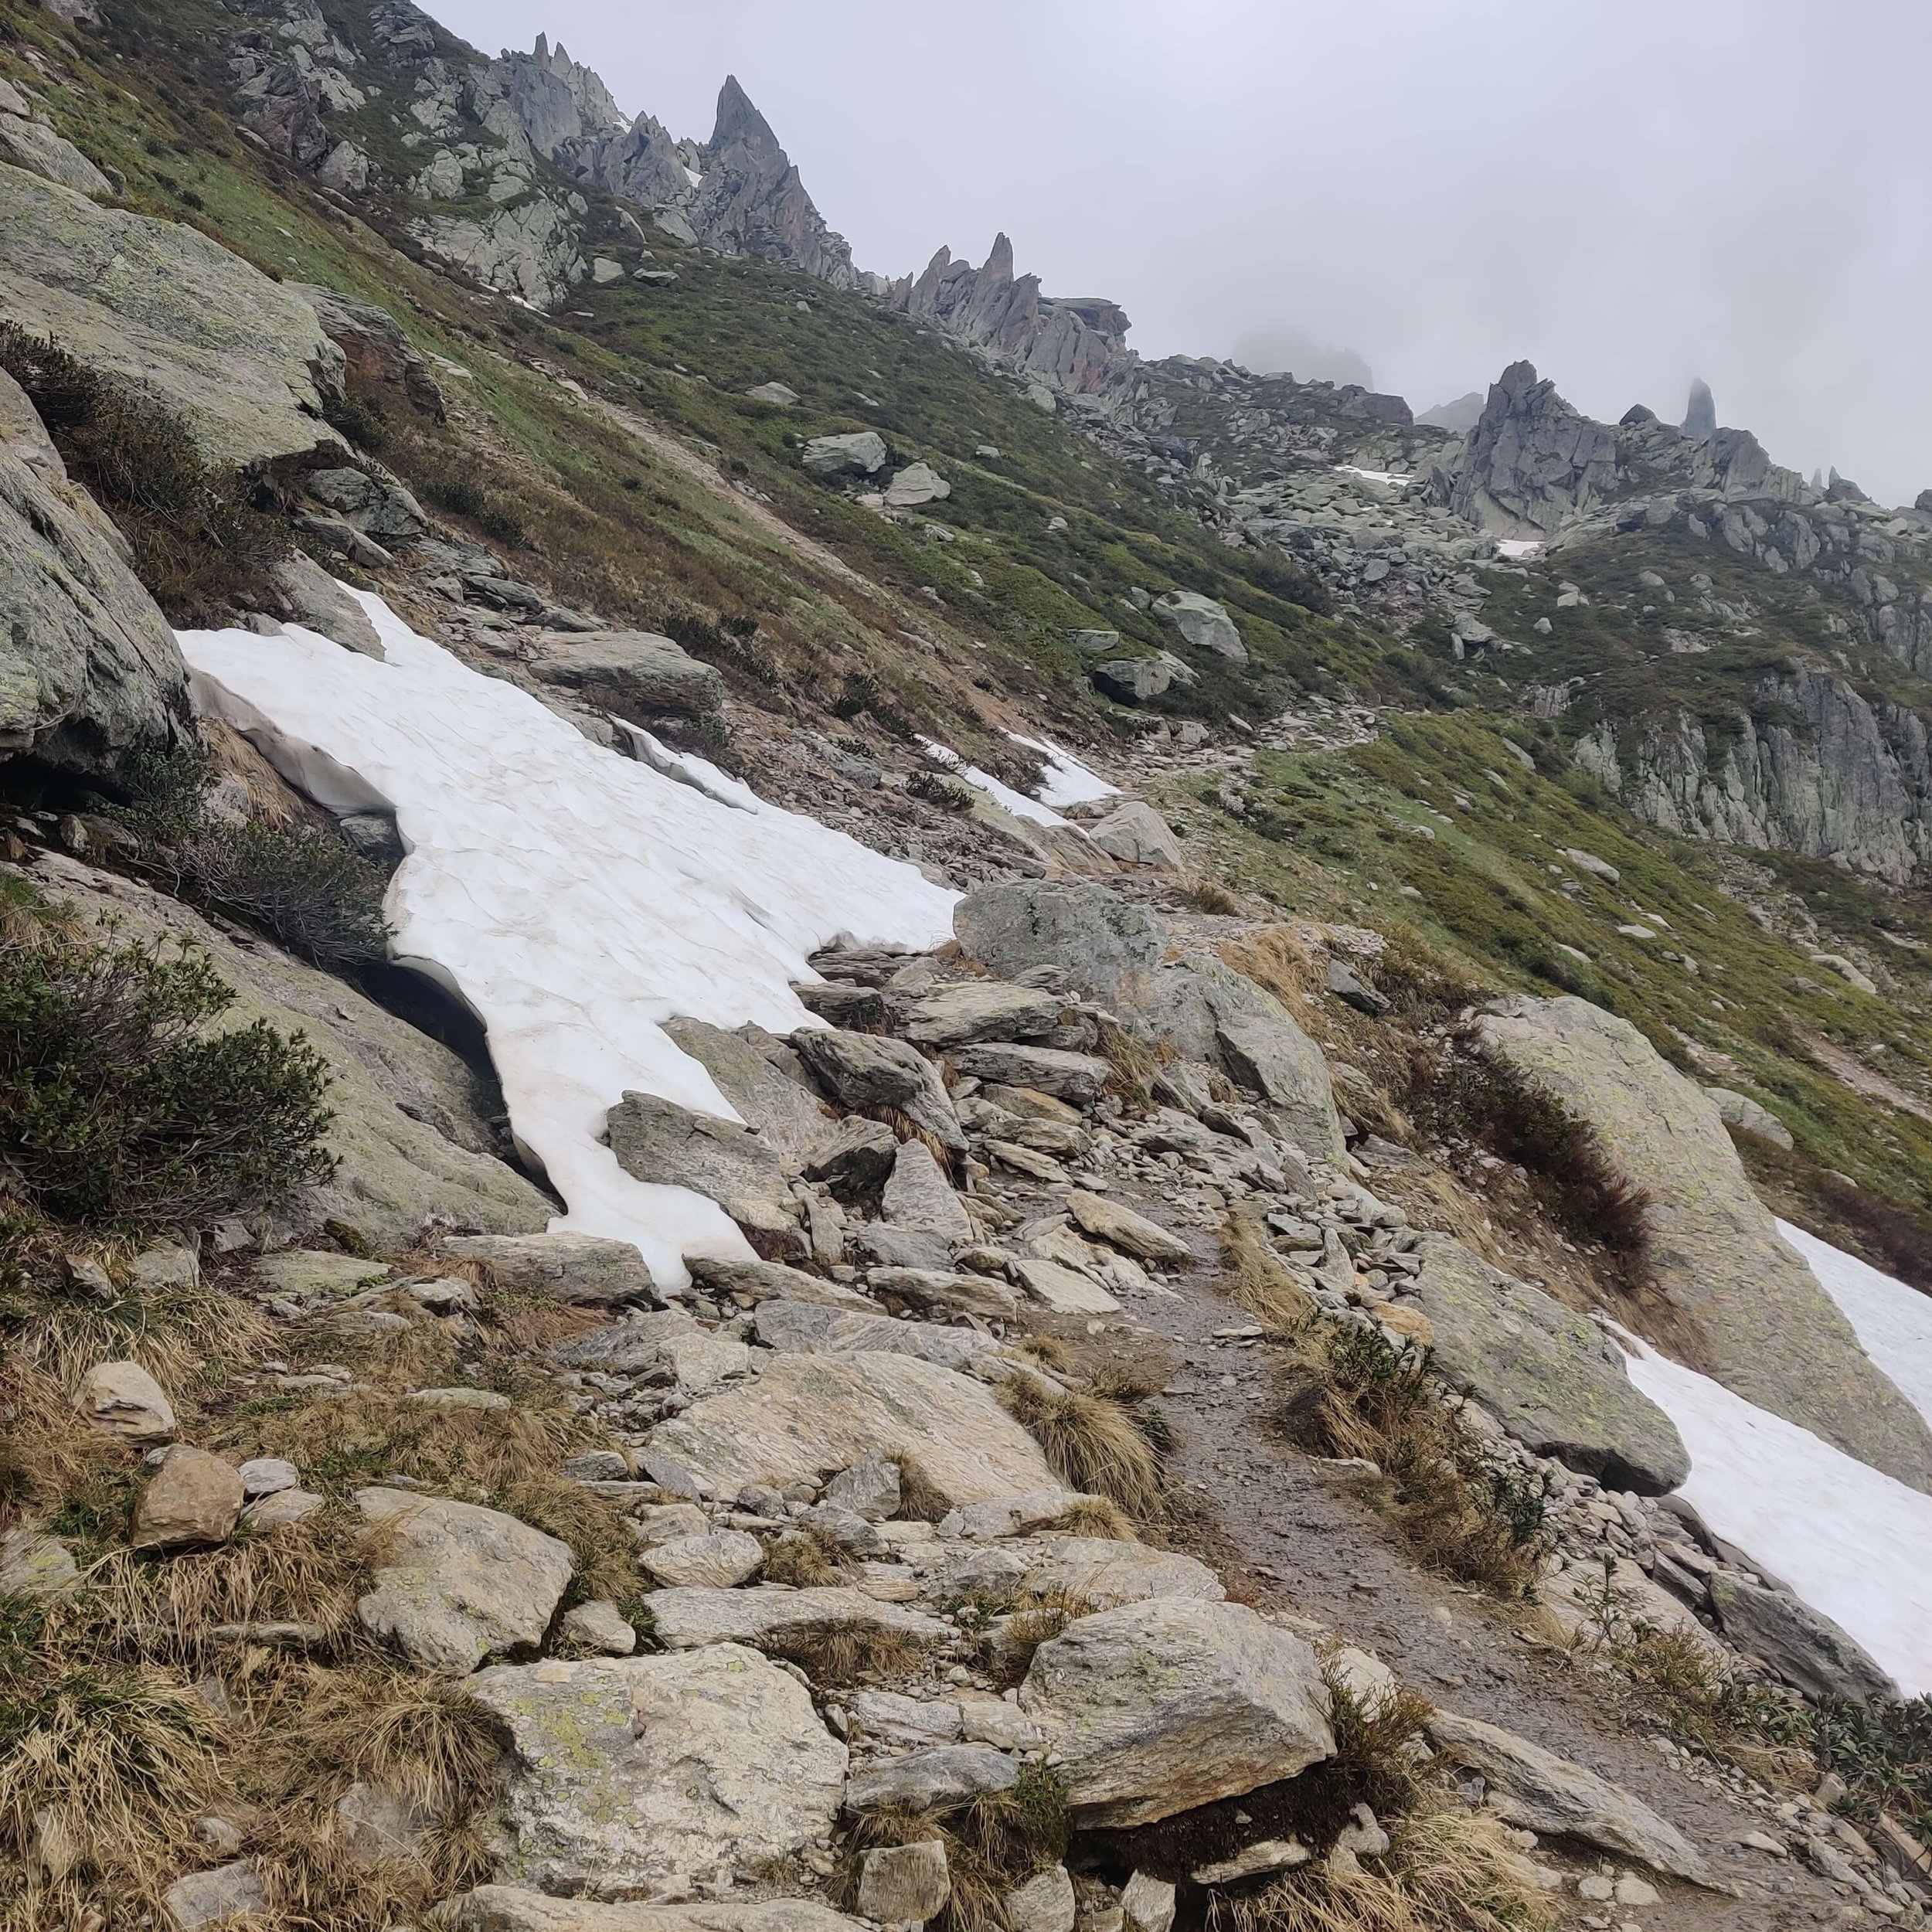 Only snow between Plan Praz and Col du Brevent for comparison_28 May 2022_resized.jpg